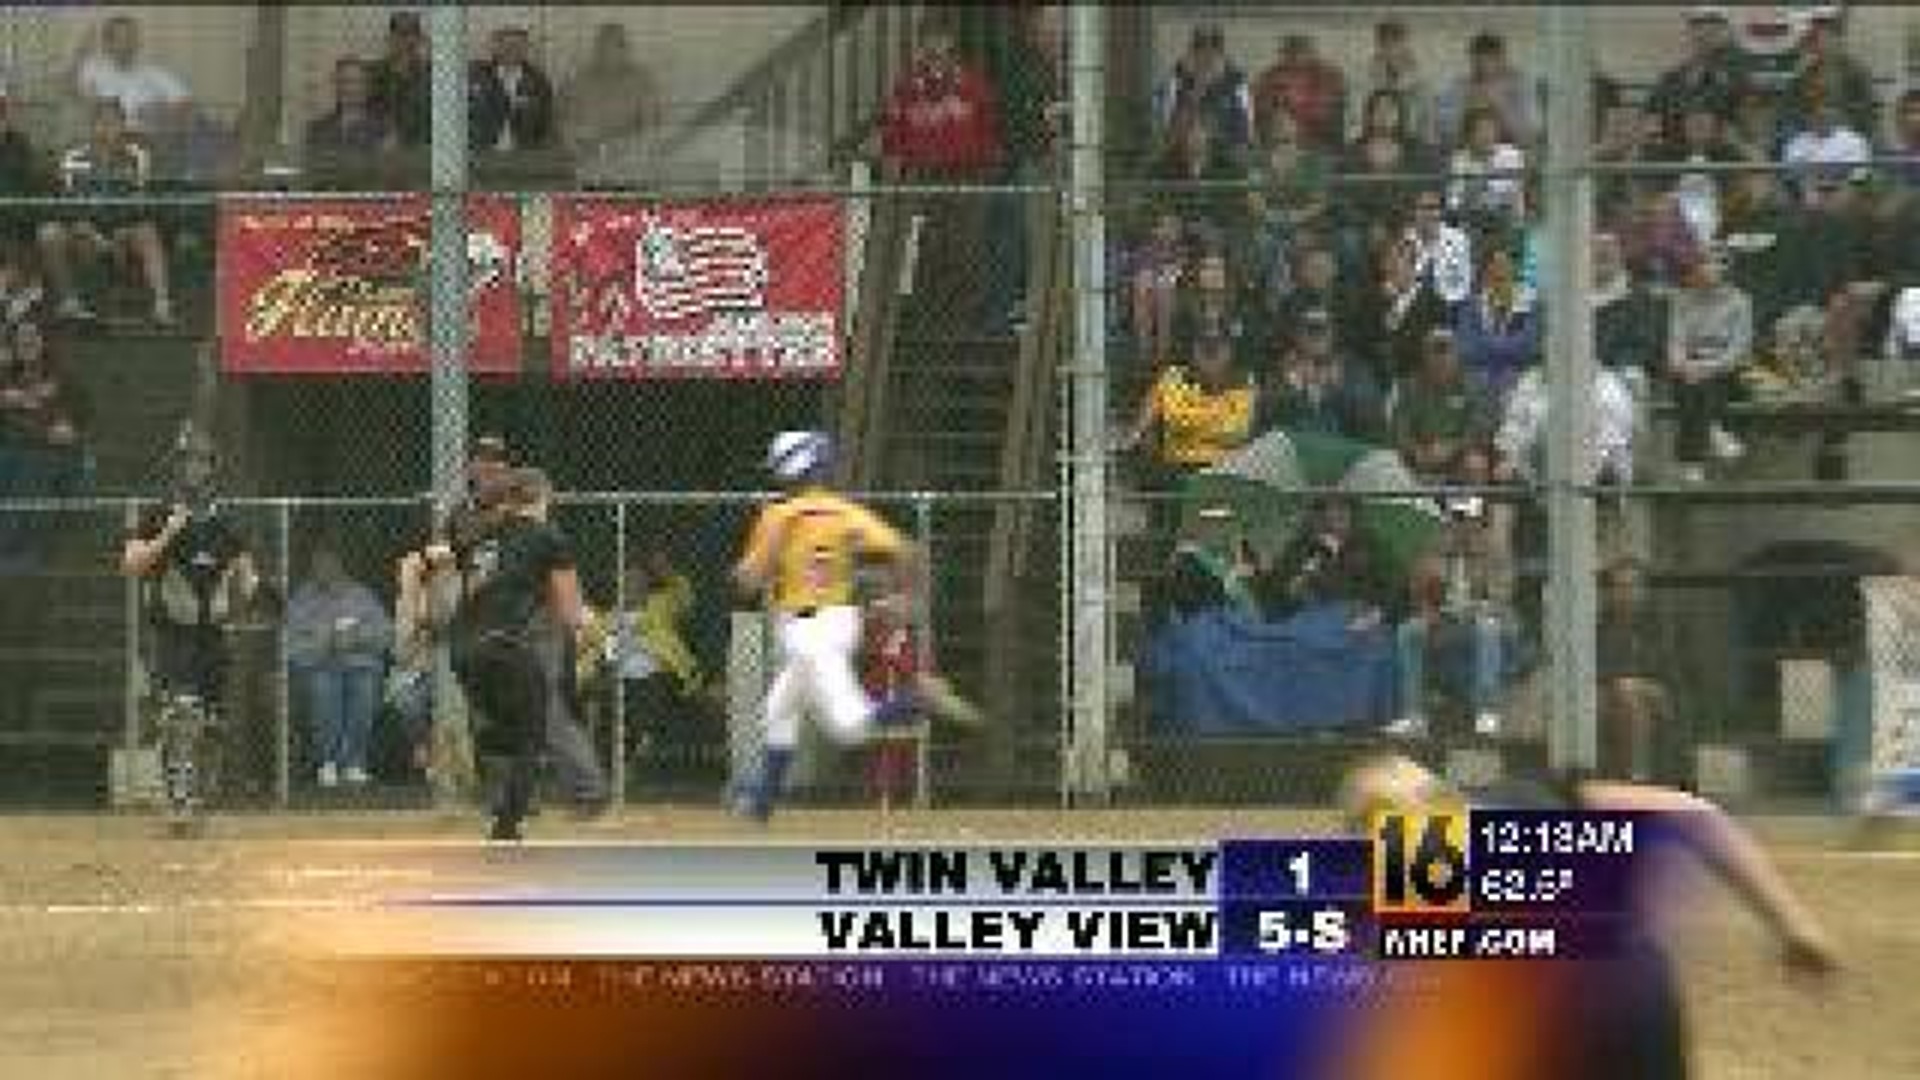 Valley View vs. Twin Valley